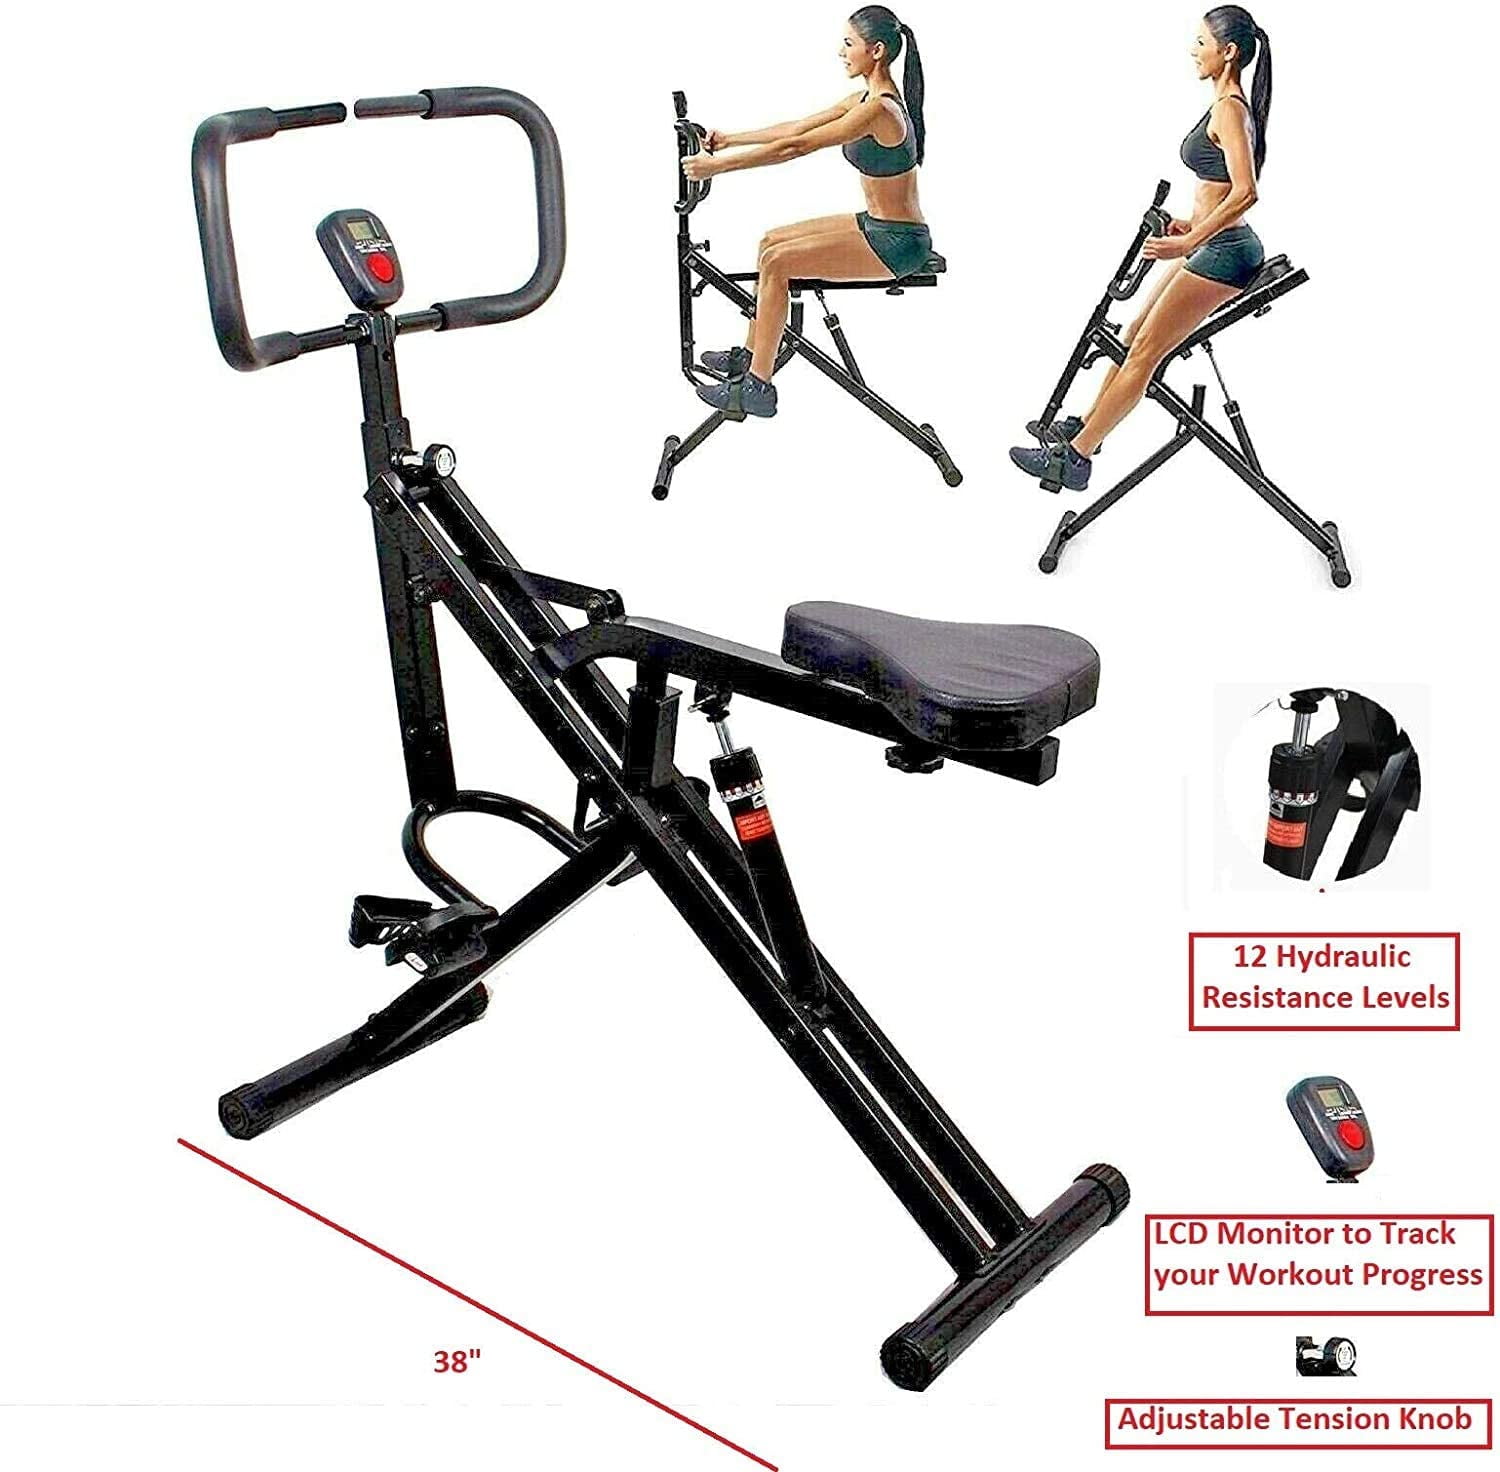 TOTAL CRUNCH M23646 Exercise Machine Instruction Manual